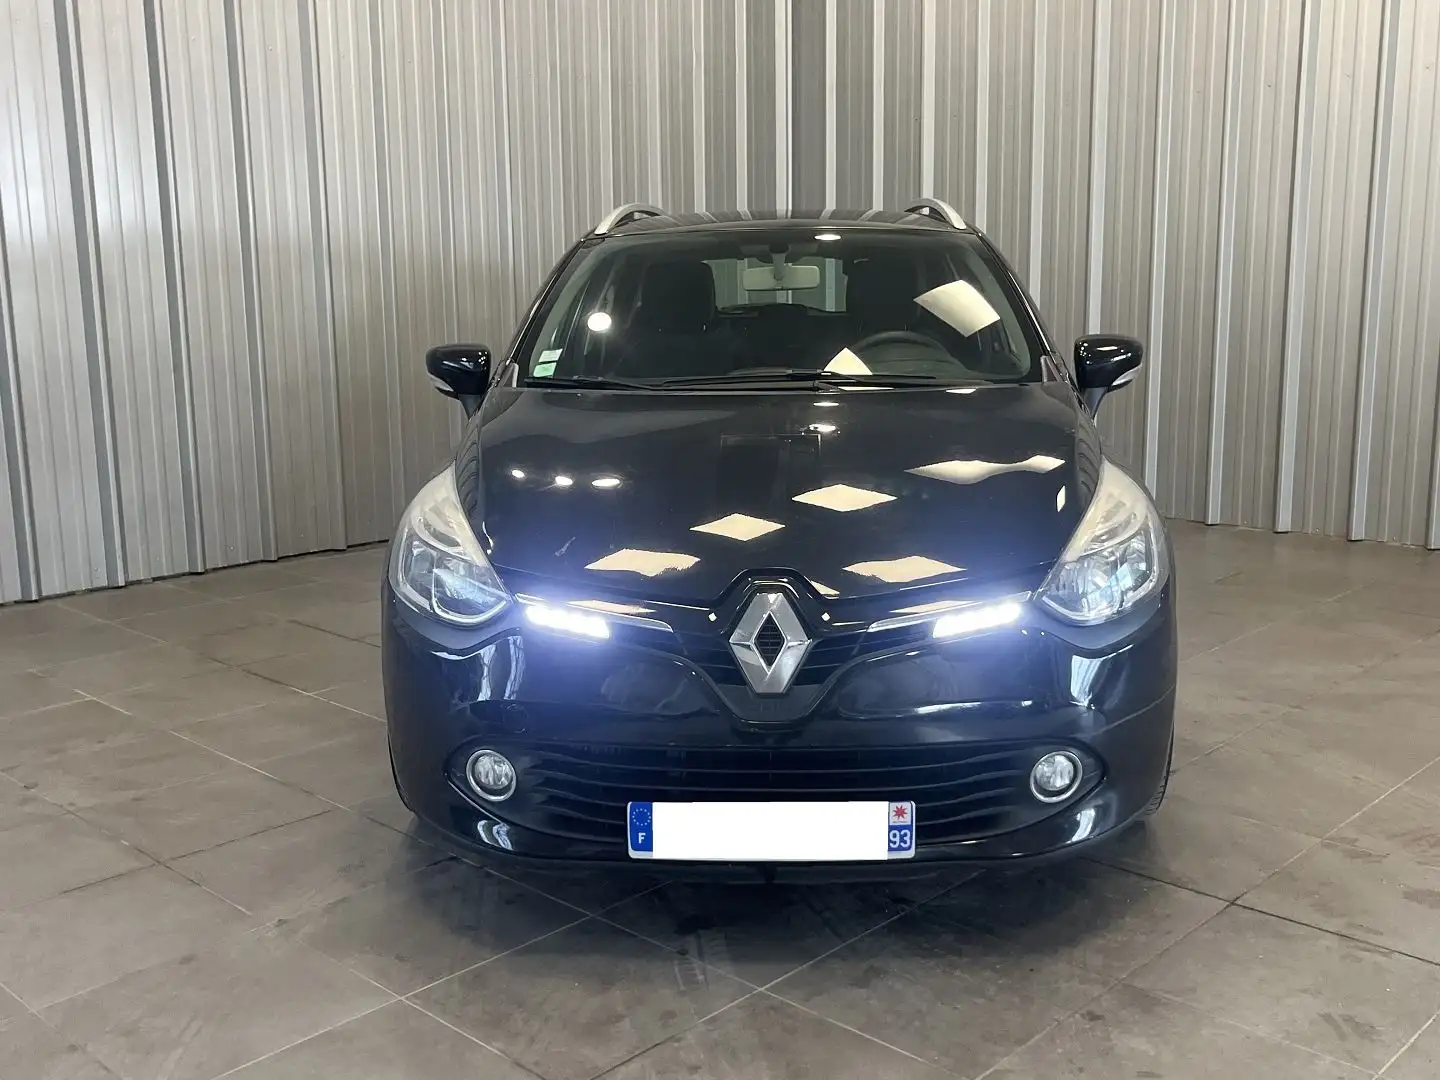 Renault Clio 1.5 DCI 75CH BUSINESS ECO² 90G - 2